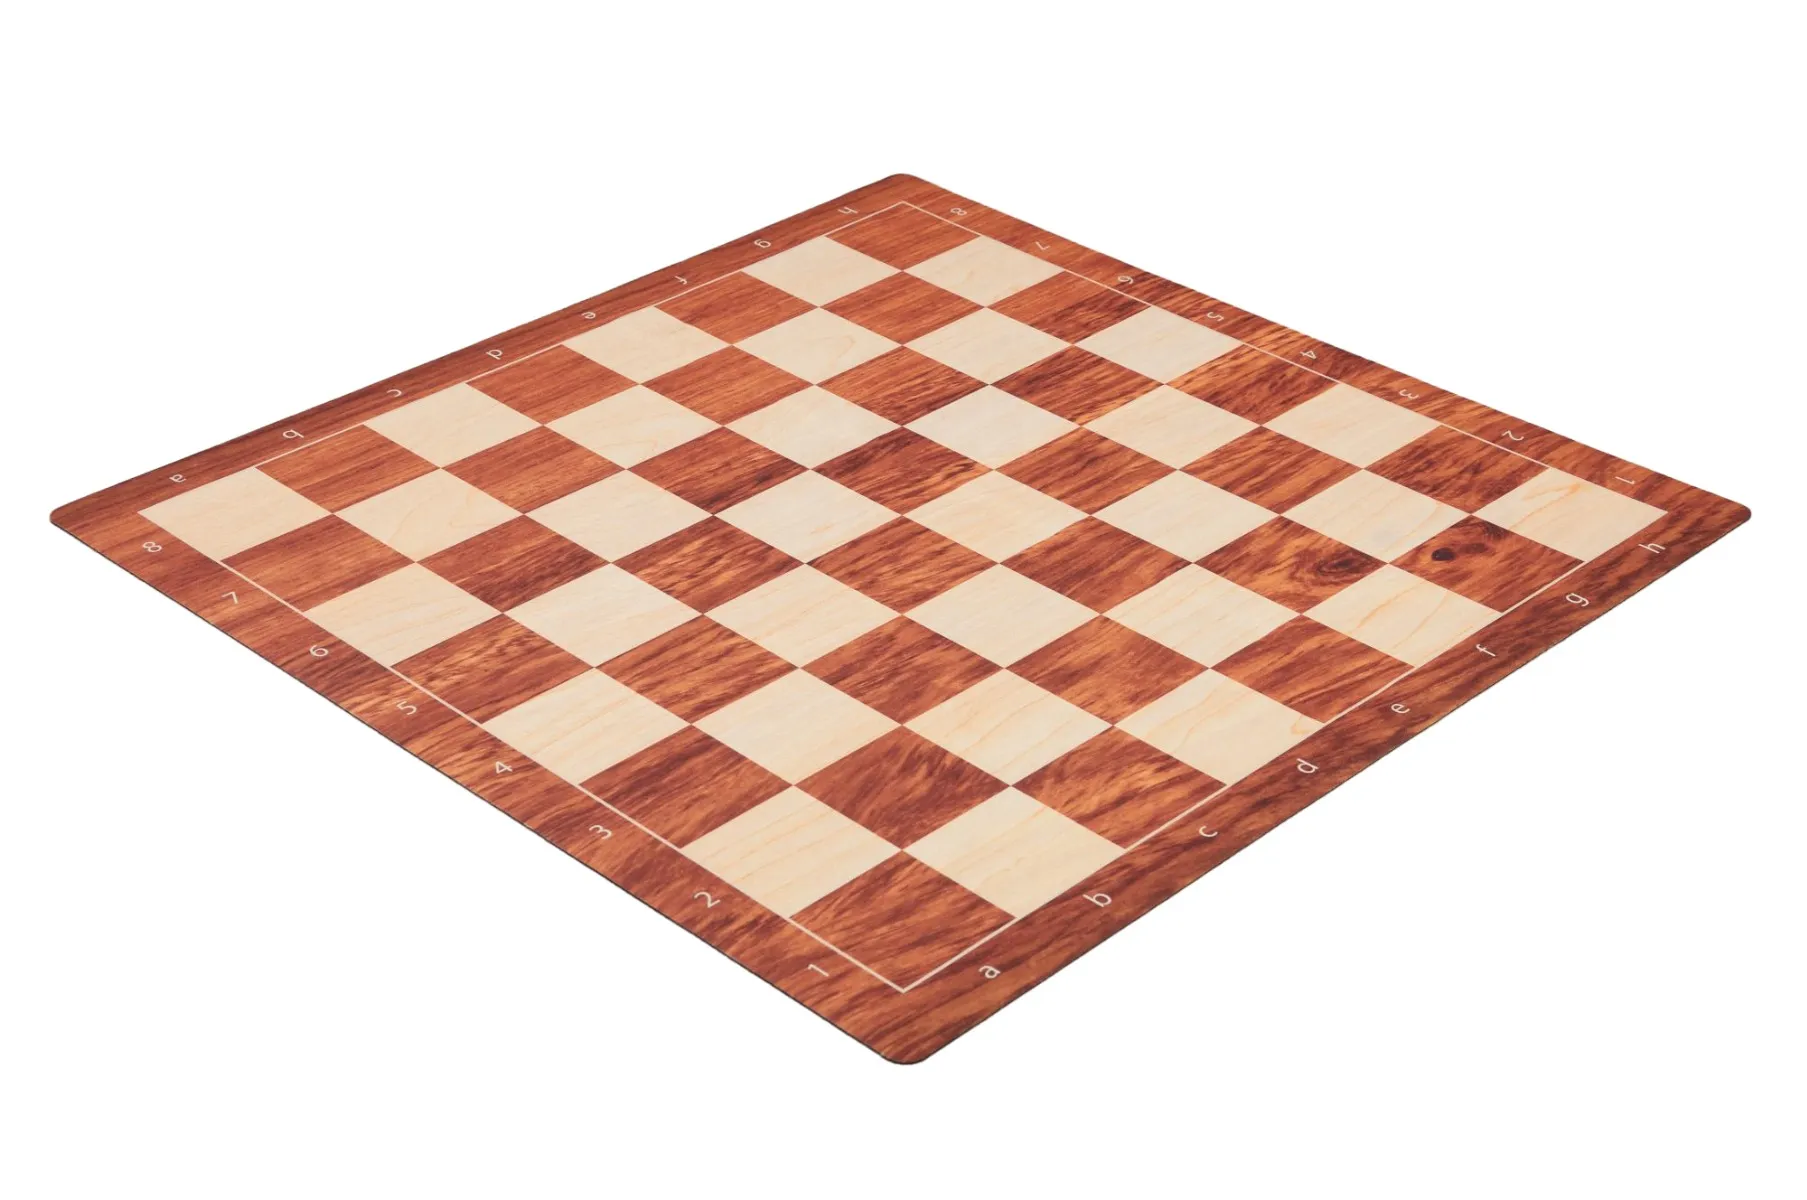 Full Color Mousepad Chess Boards